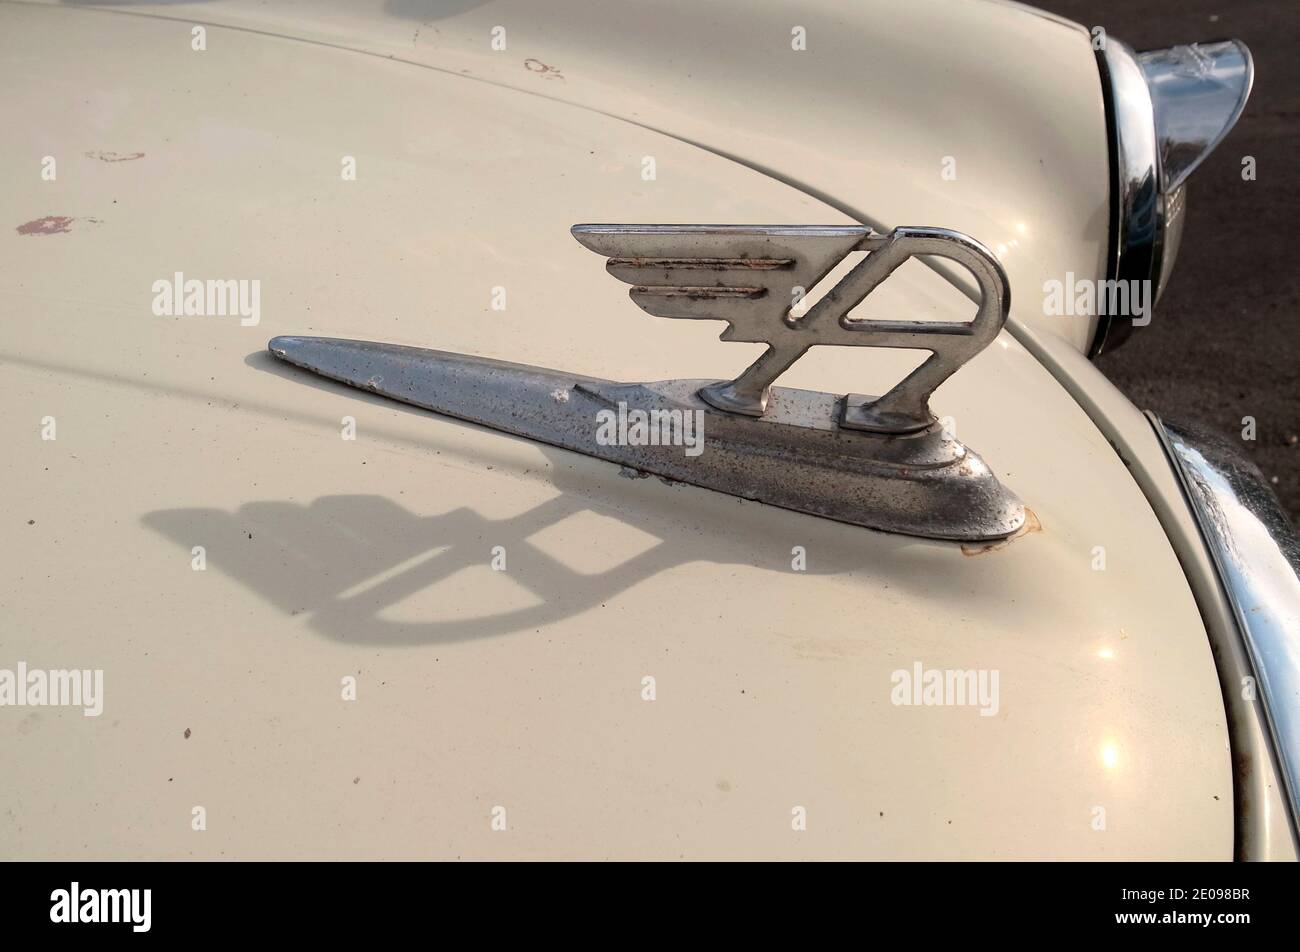 AJAXNETPHOTO. 2020. WORTHING, ENGLAND. - SMALL FAMILY - FLYING 'A' CHROMED SILVER BADGE ON BONNET OF AUSTIN A30 4CYL ENGINED FAMILY SALOON CAR MANUFACTURED BETWEEN 1952 AND 1956 DESIGNED BY RICARDO BURZI PARKED IN RESIDENTIAL STREET.PHOTO:JONATHAN EASTLAND/AJAX REF:GR202204 9852 Stock Photo